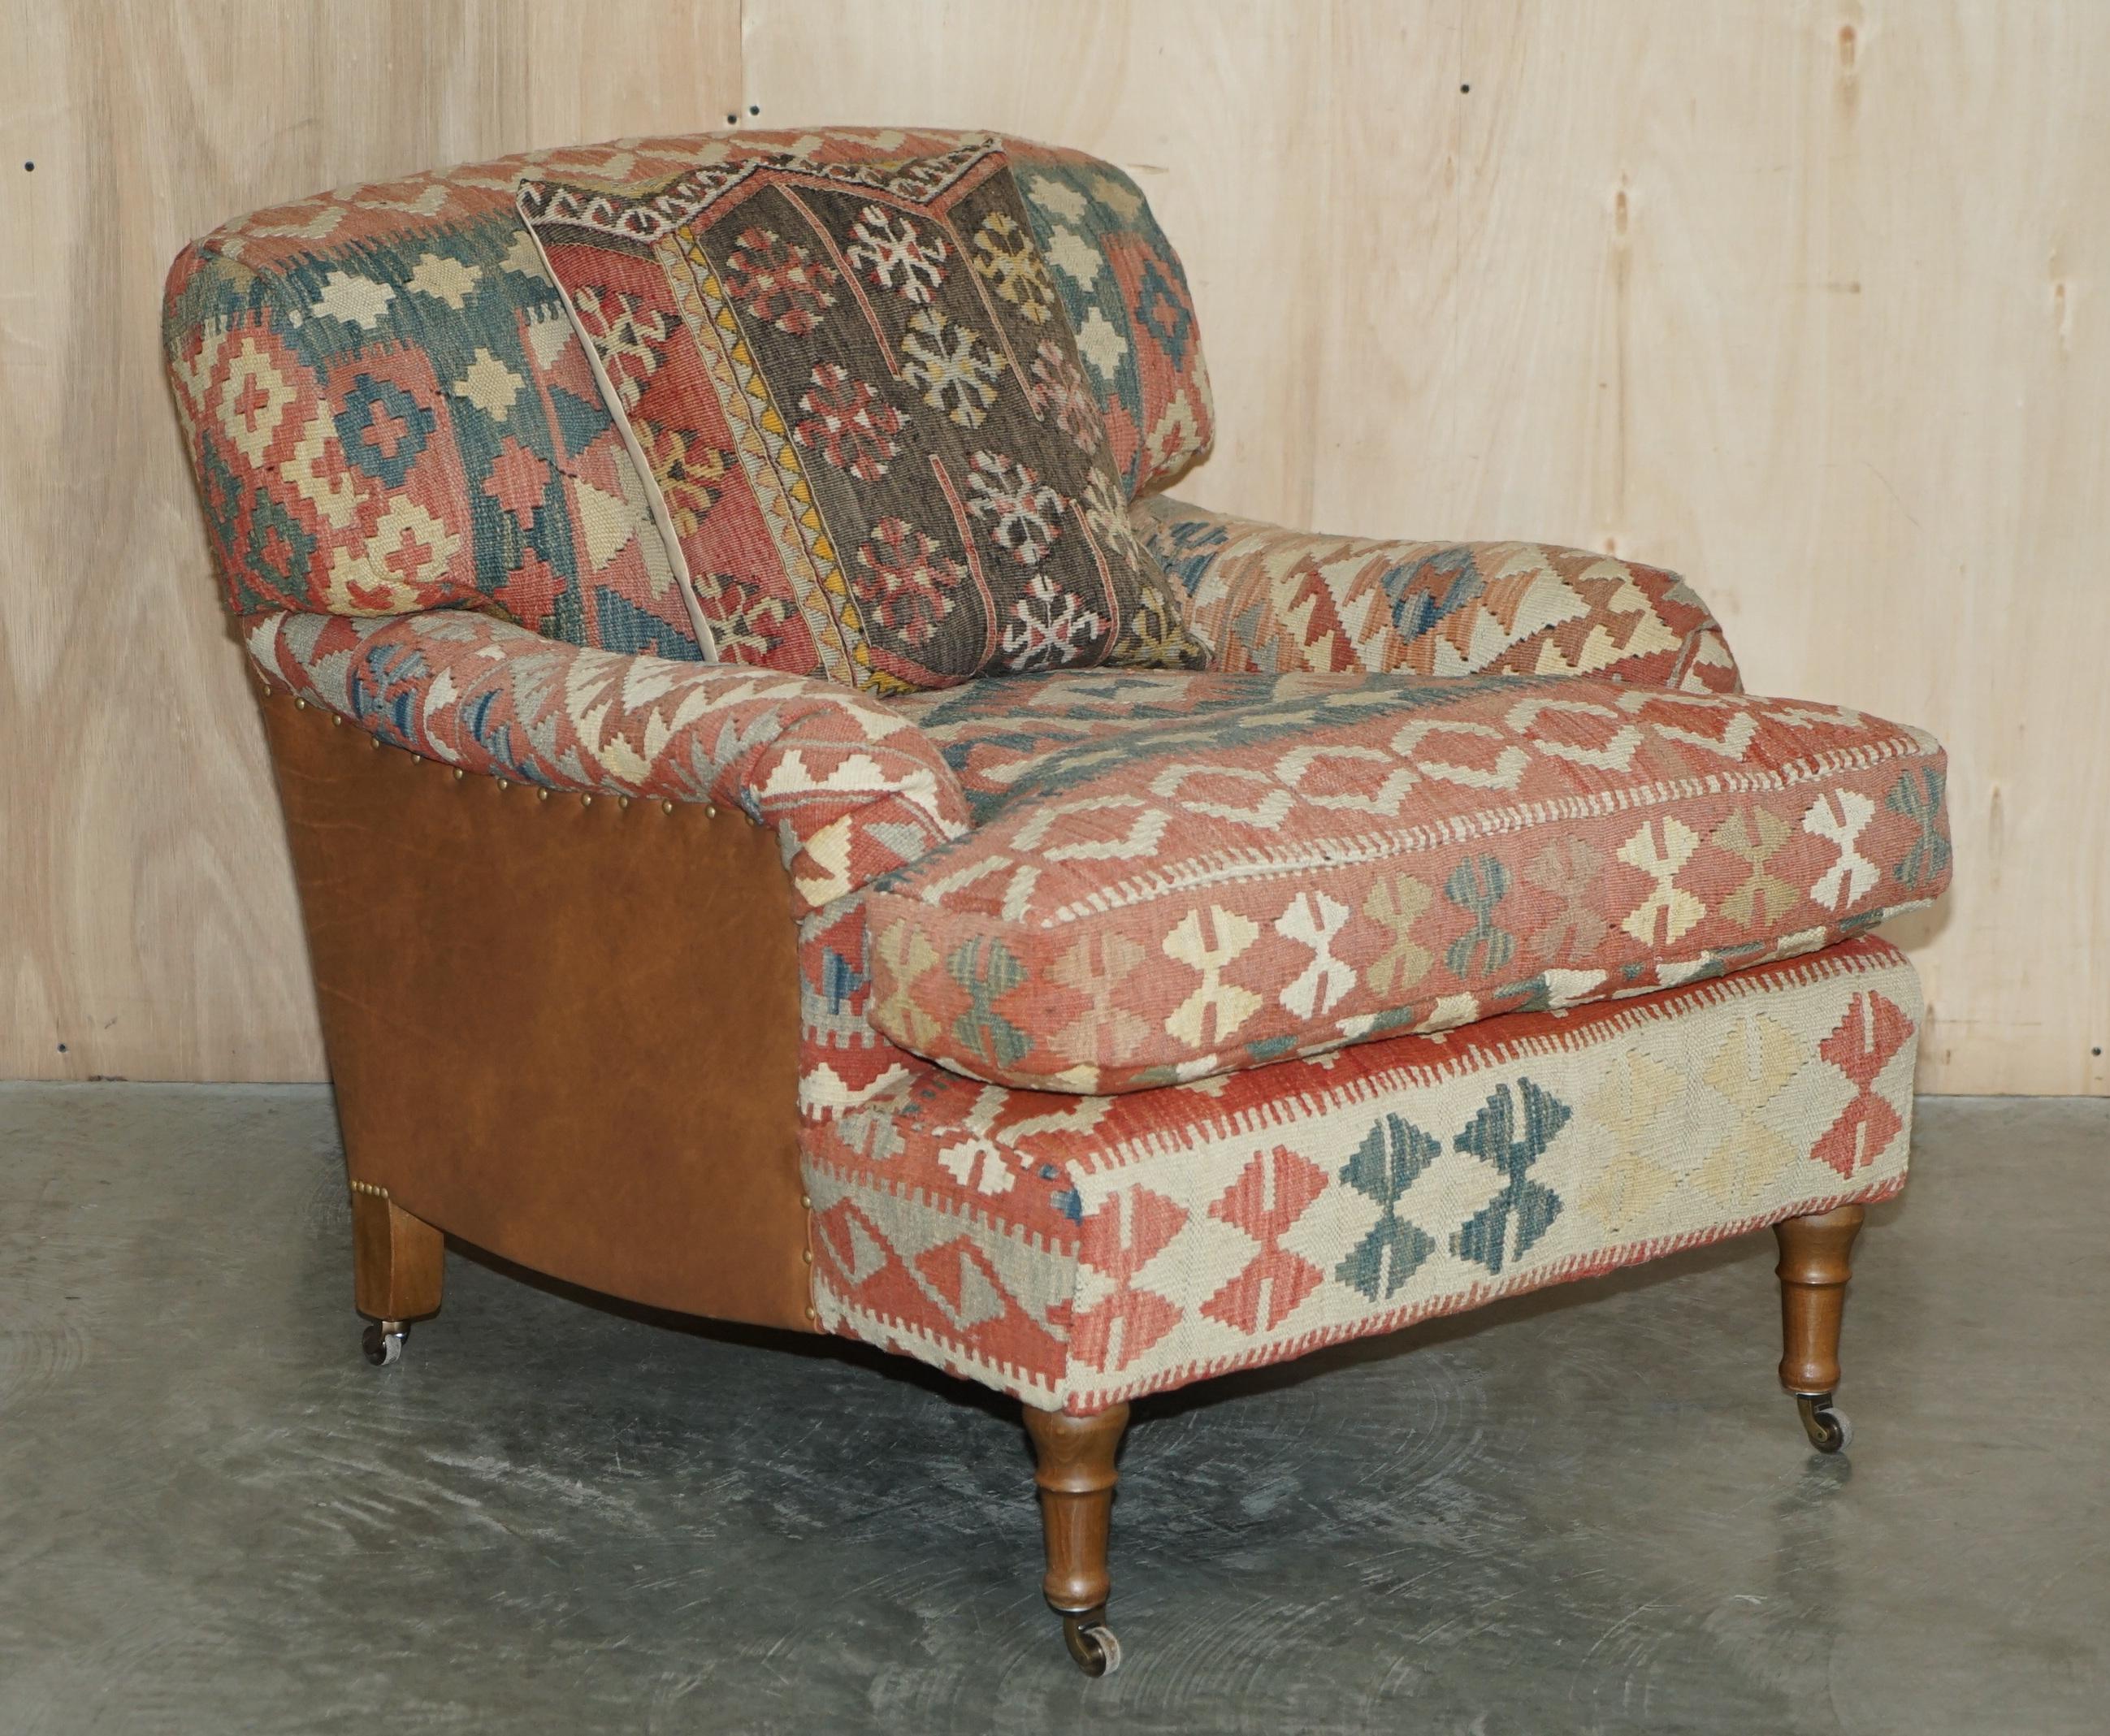 We are delighted to offer for sale this hand made in England, George Smith Signature Standard arm style, feather cushion back and base, Kilim and brown leather upholstered armchair with matching footstool / ottoman

I have the matching sofa listed